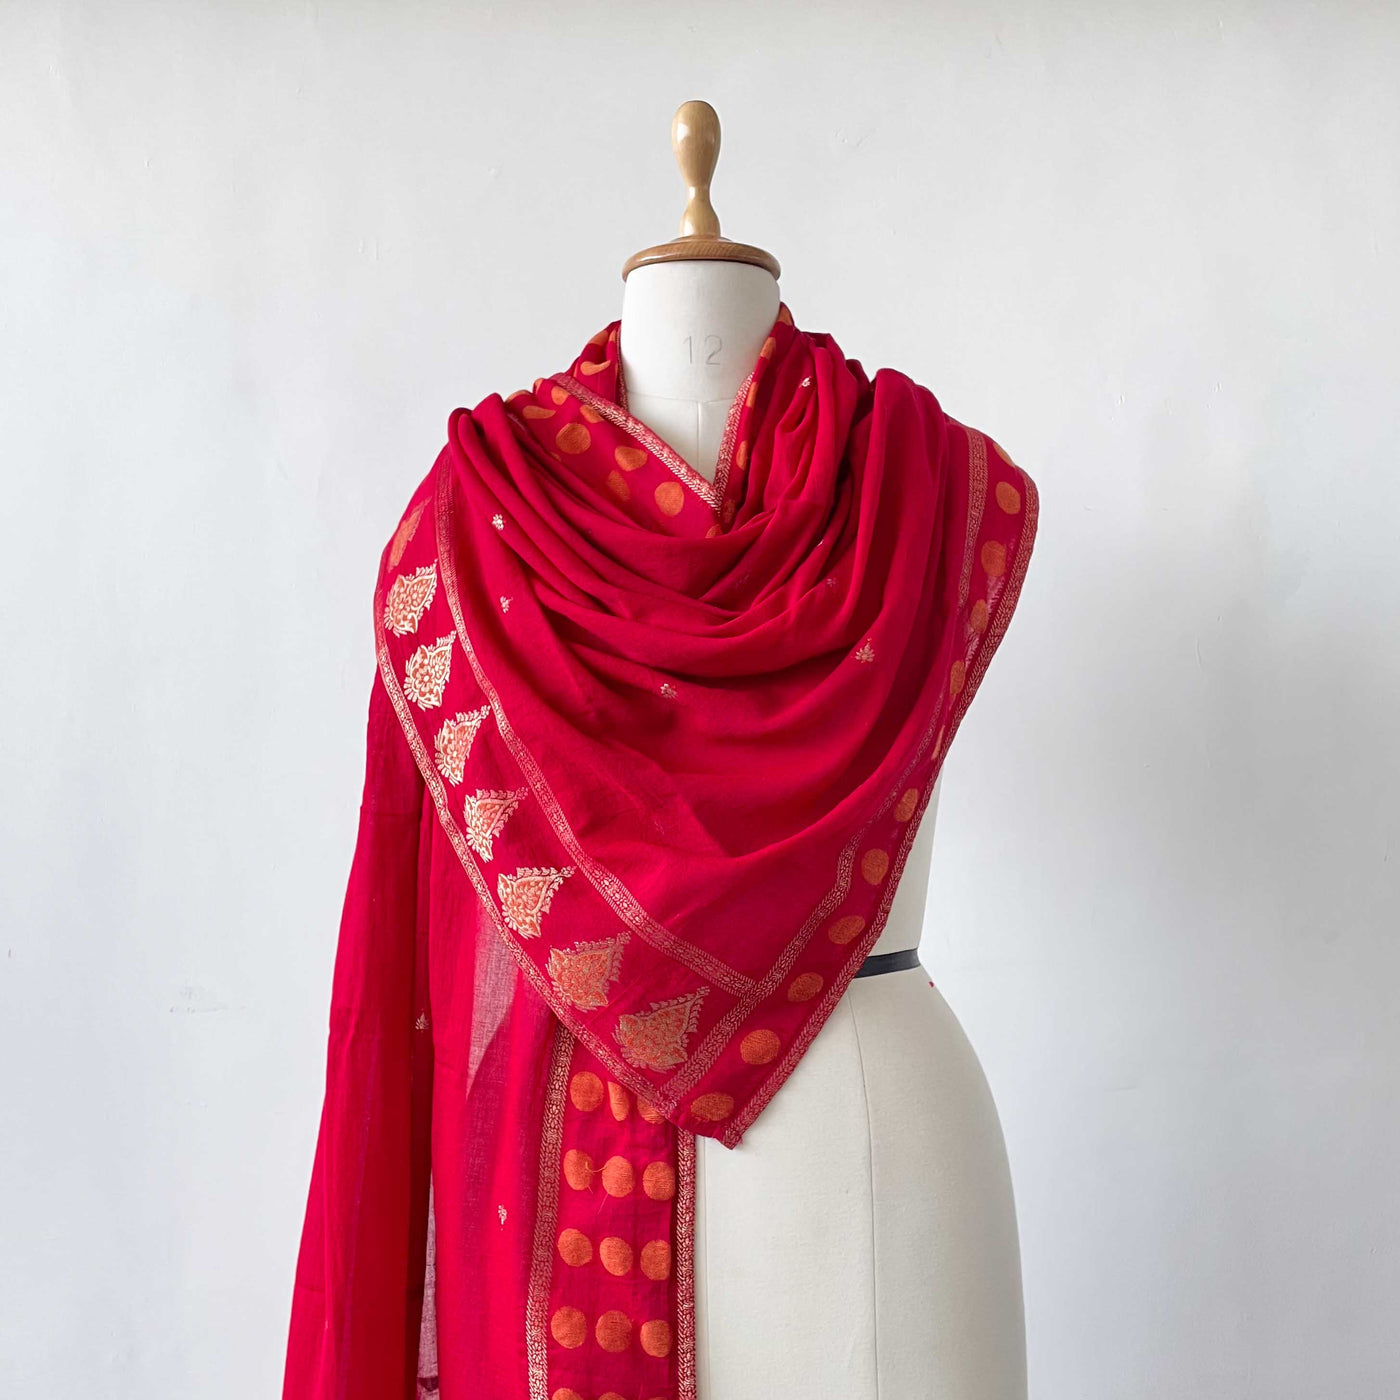 Mix Dupatta Dupatta Bright Red & Gold Floral and Polka Woven Pure Mul Cotton Dupatta (Width 36 Inches)